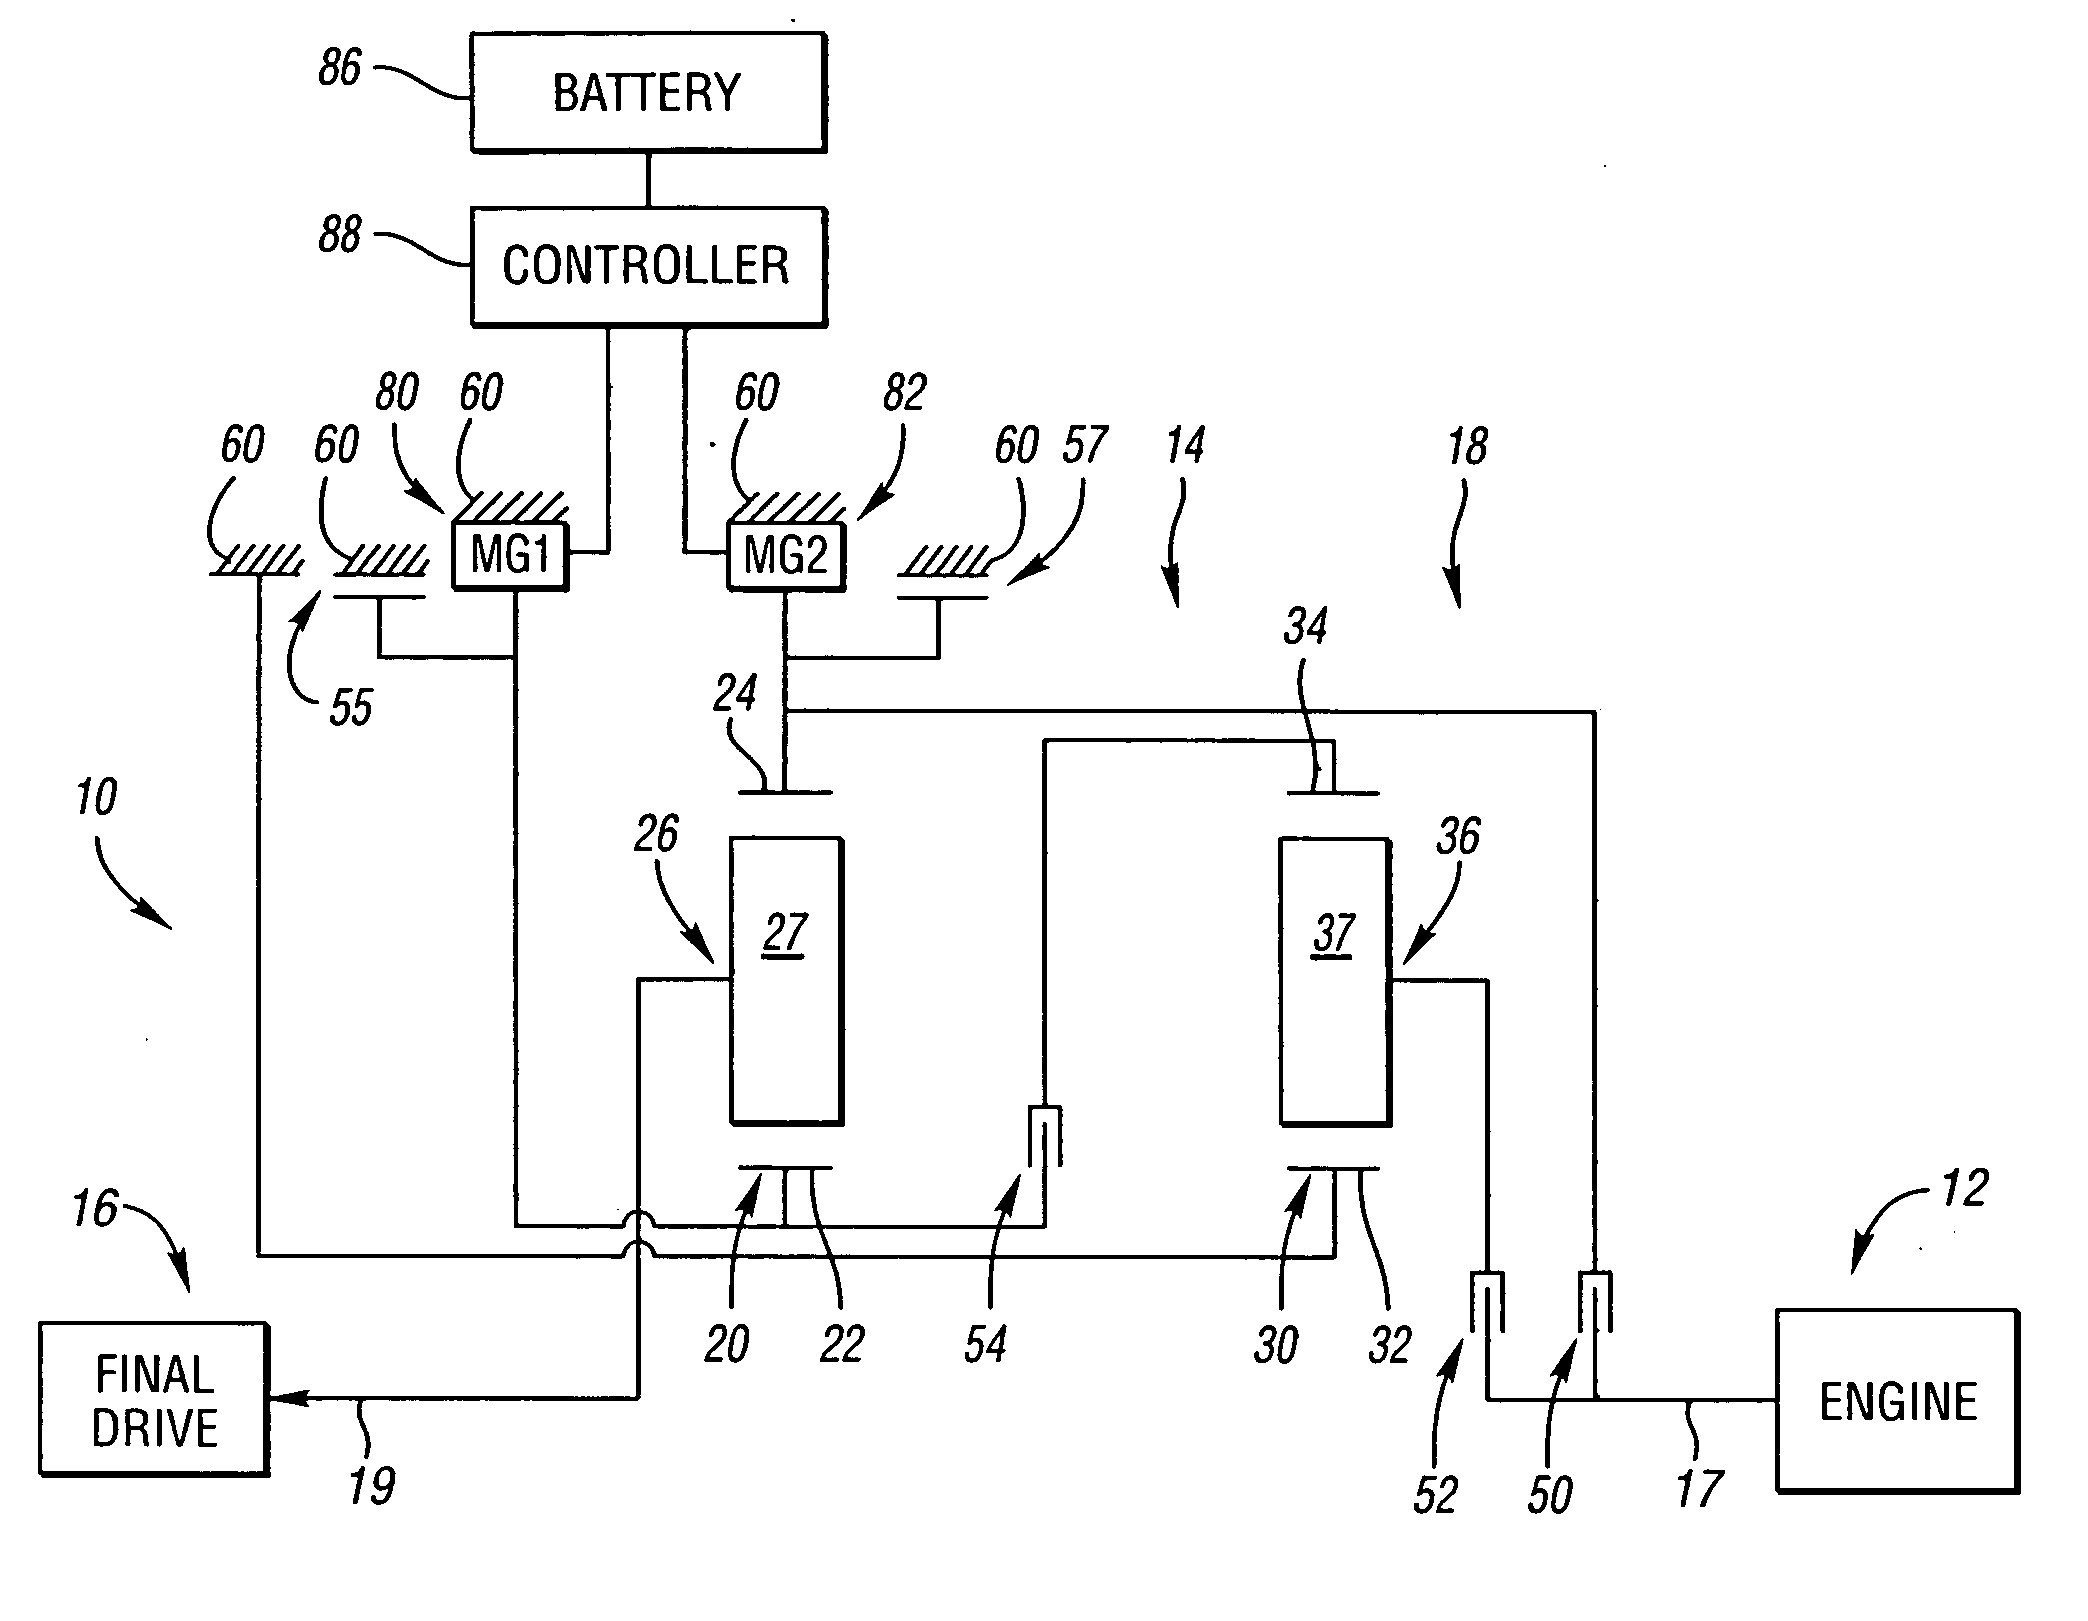 Electrically variable transmission having two planetary gear sets with one stationary member and clutched input